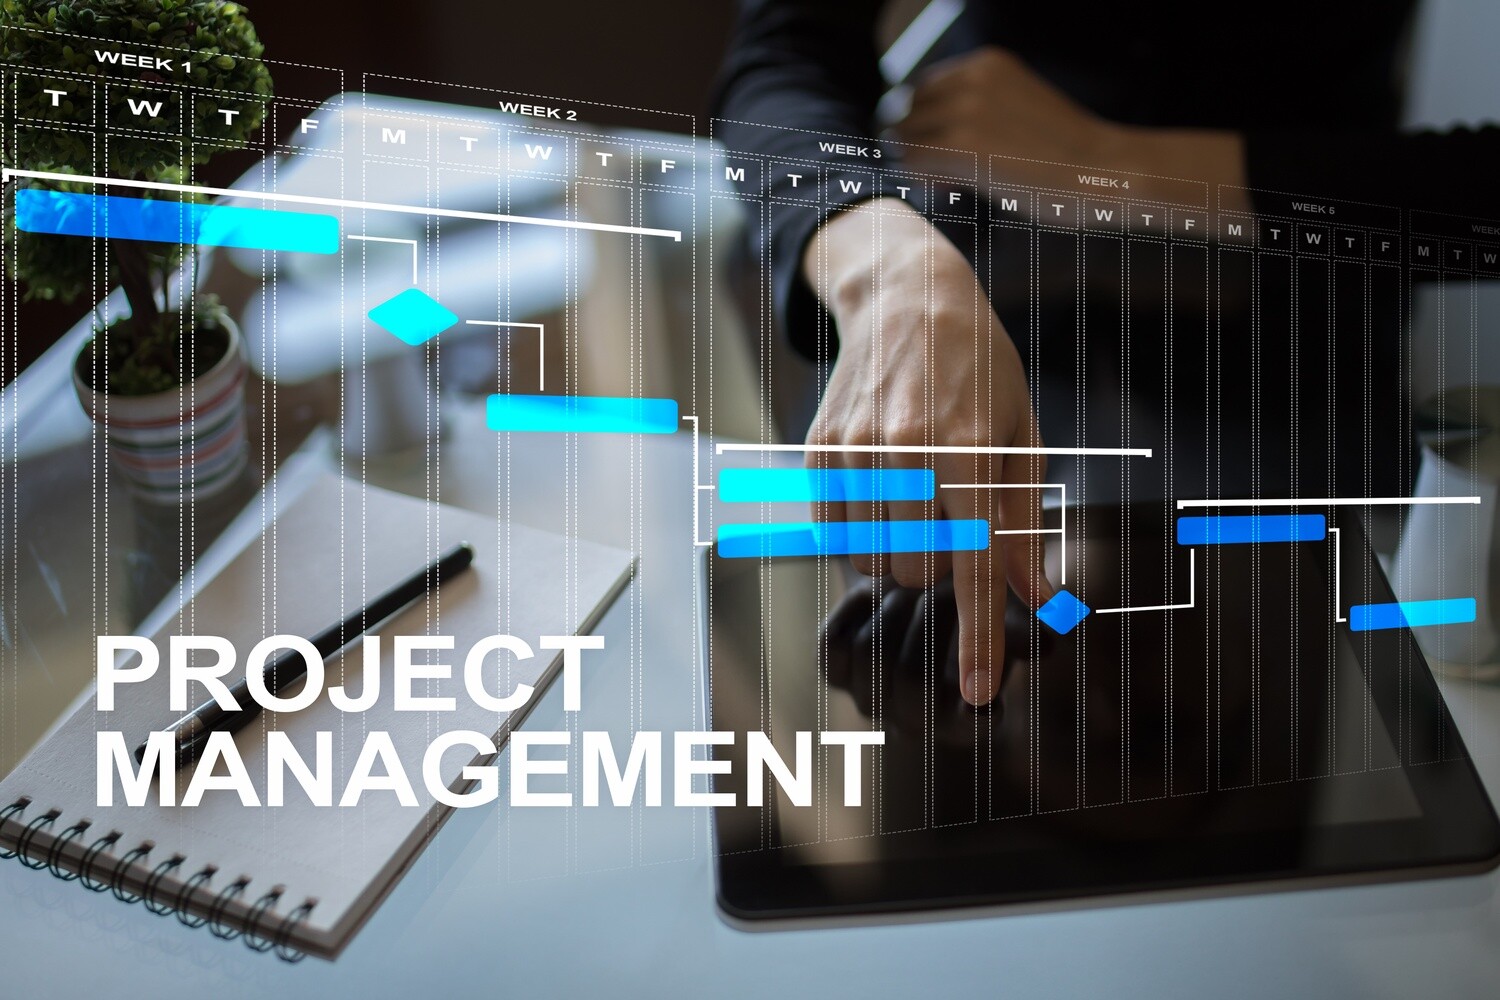 Project Management Fundamentals Using Microsoft Project – 3 days, 21 PDUs